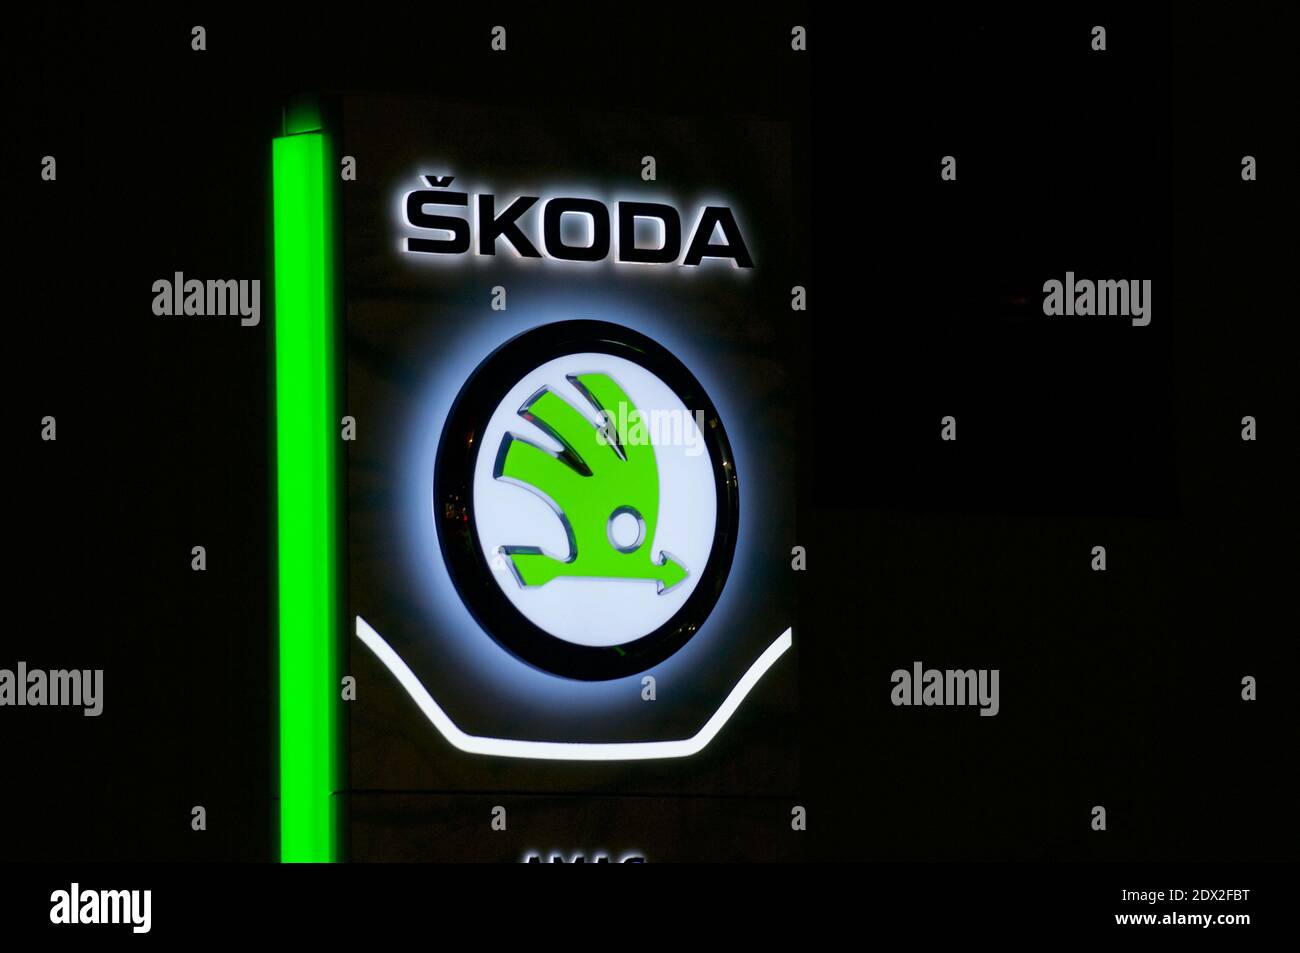 Lugano, Ticino, Switzerland - 3rd December 2020 : Luminous Czech Skoda car dealership logo hanging in front of the garage building in Lugano. is a Cze Stock Photo